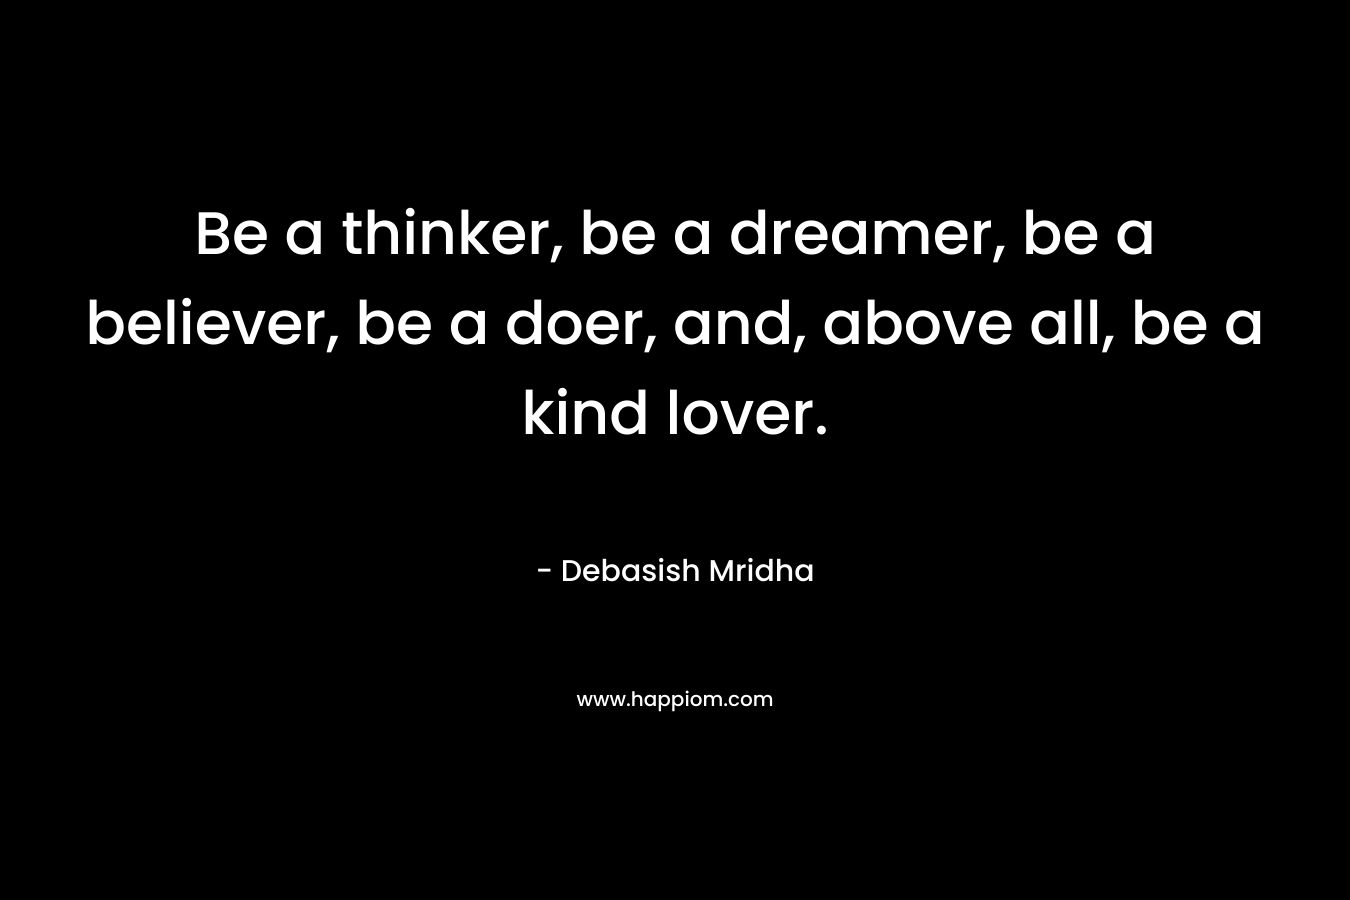 Be a thinker, be a dreamer, be a believer, be a doer, and, above all, be a kind lover.